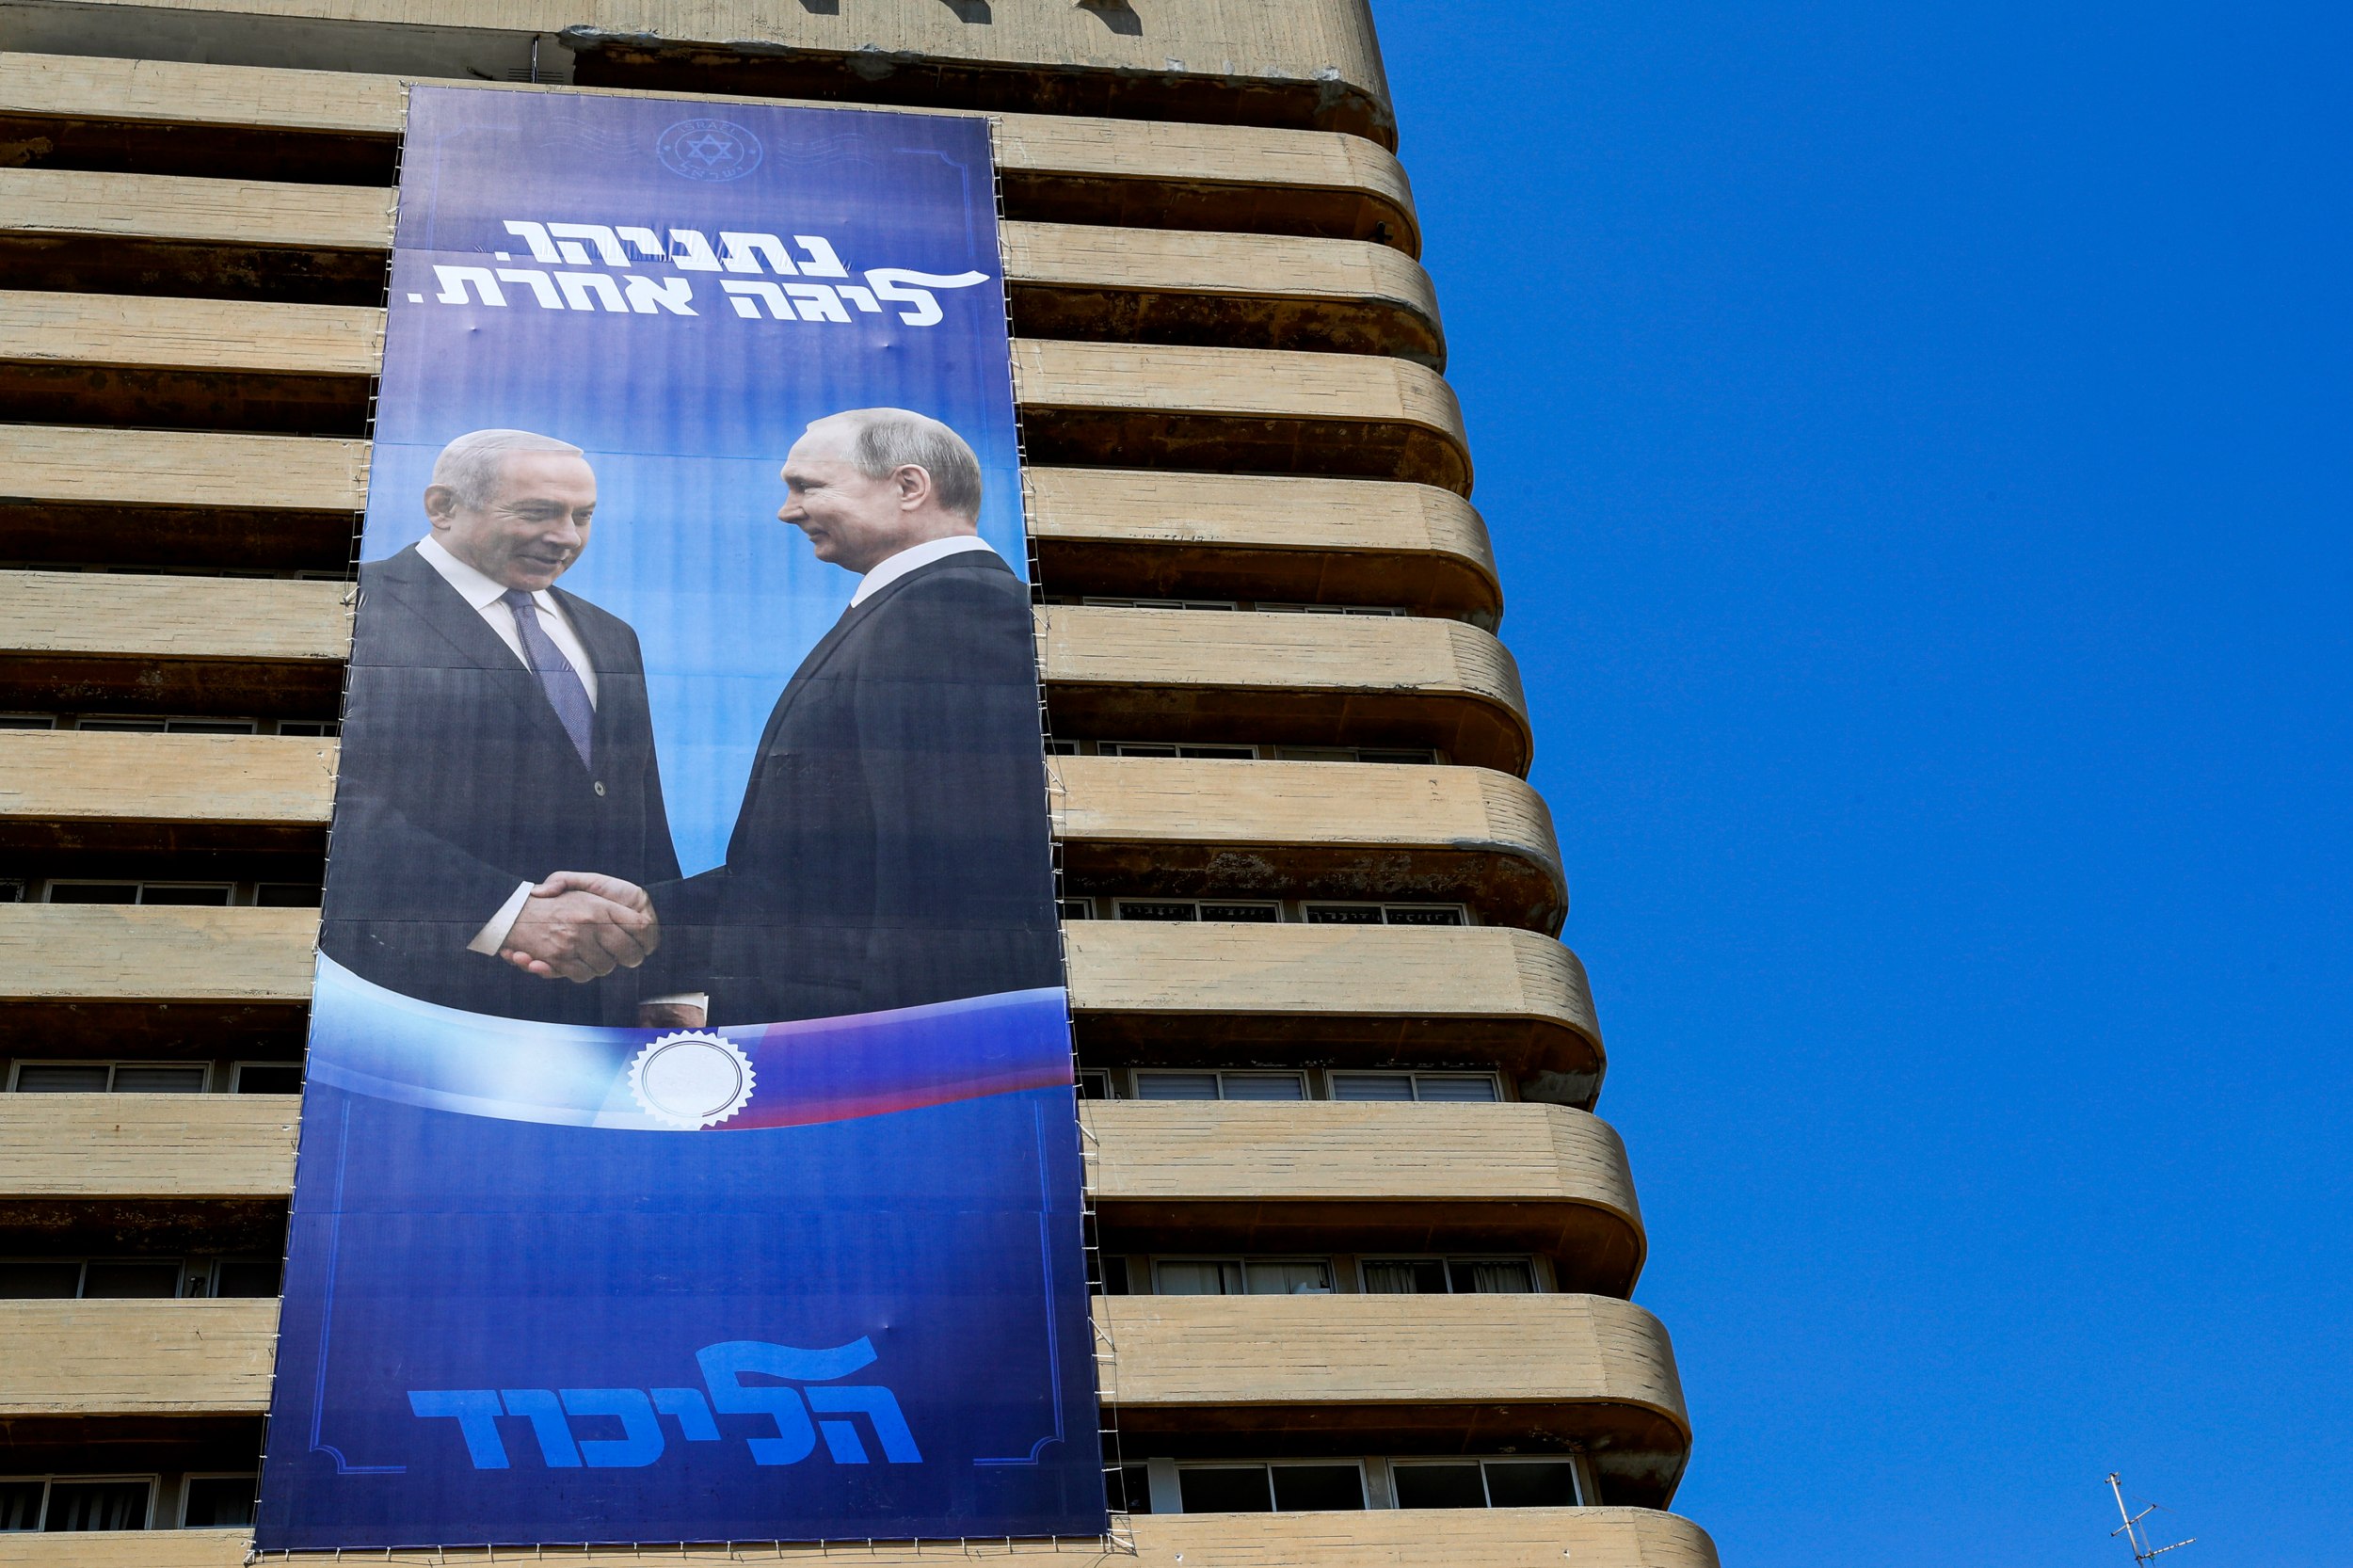 Netanyahu's campaign posters with Putin have sparked controversy (AFP)